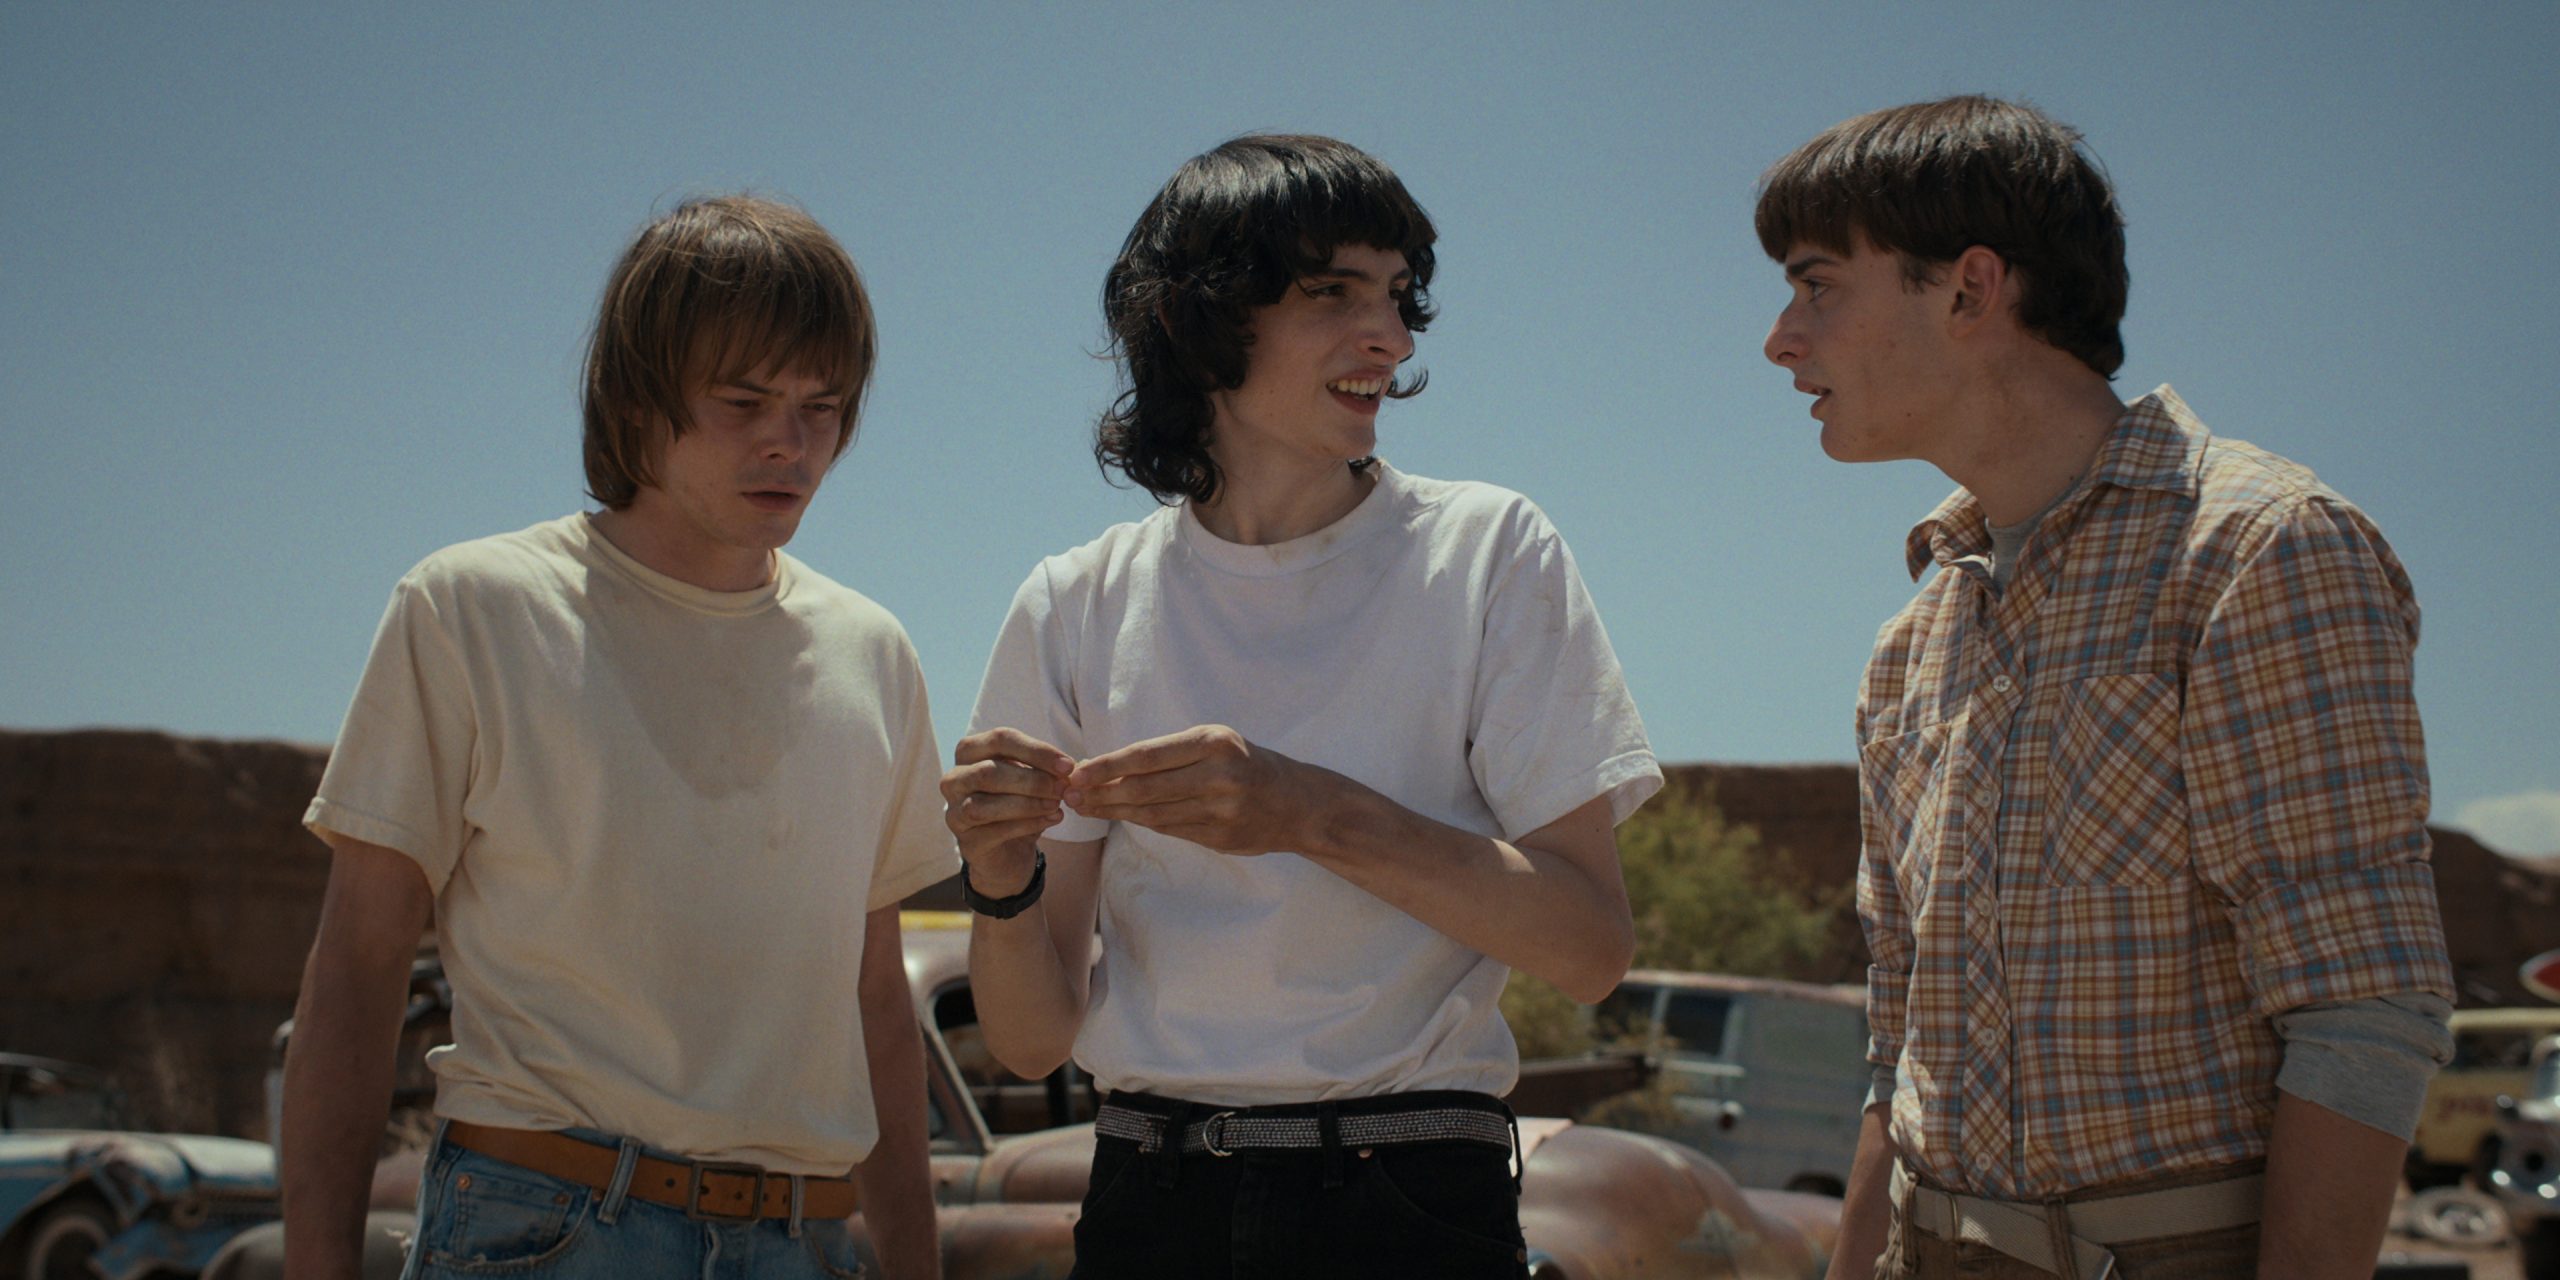 Is Will Byers gay? Stranger Things 4 cast hint Will has crush on